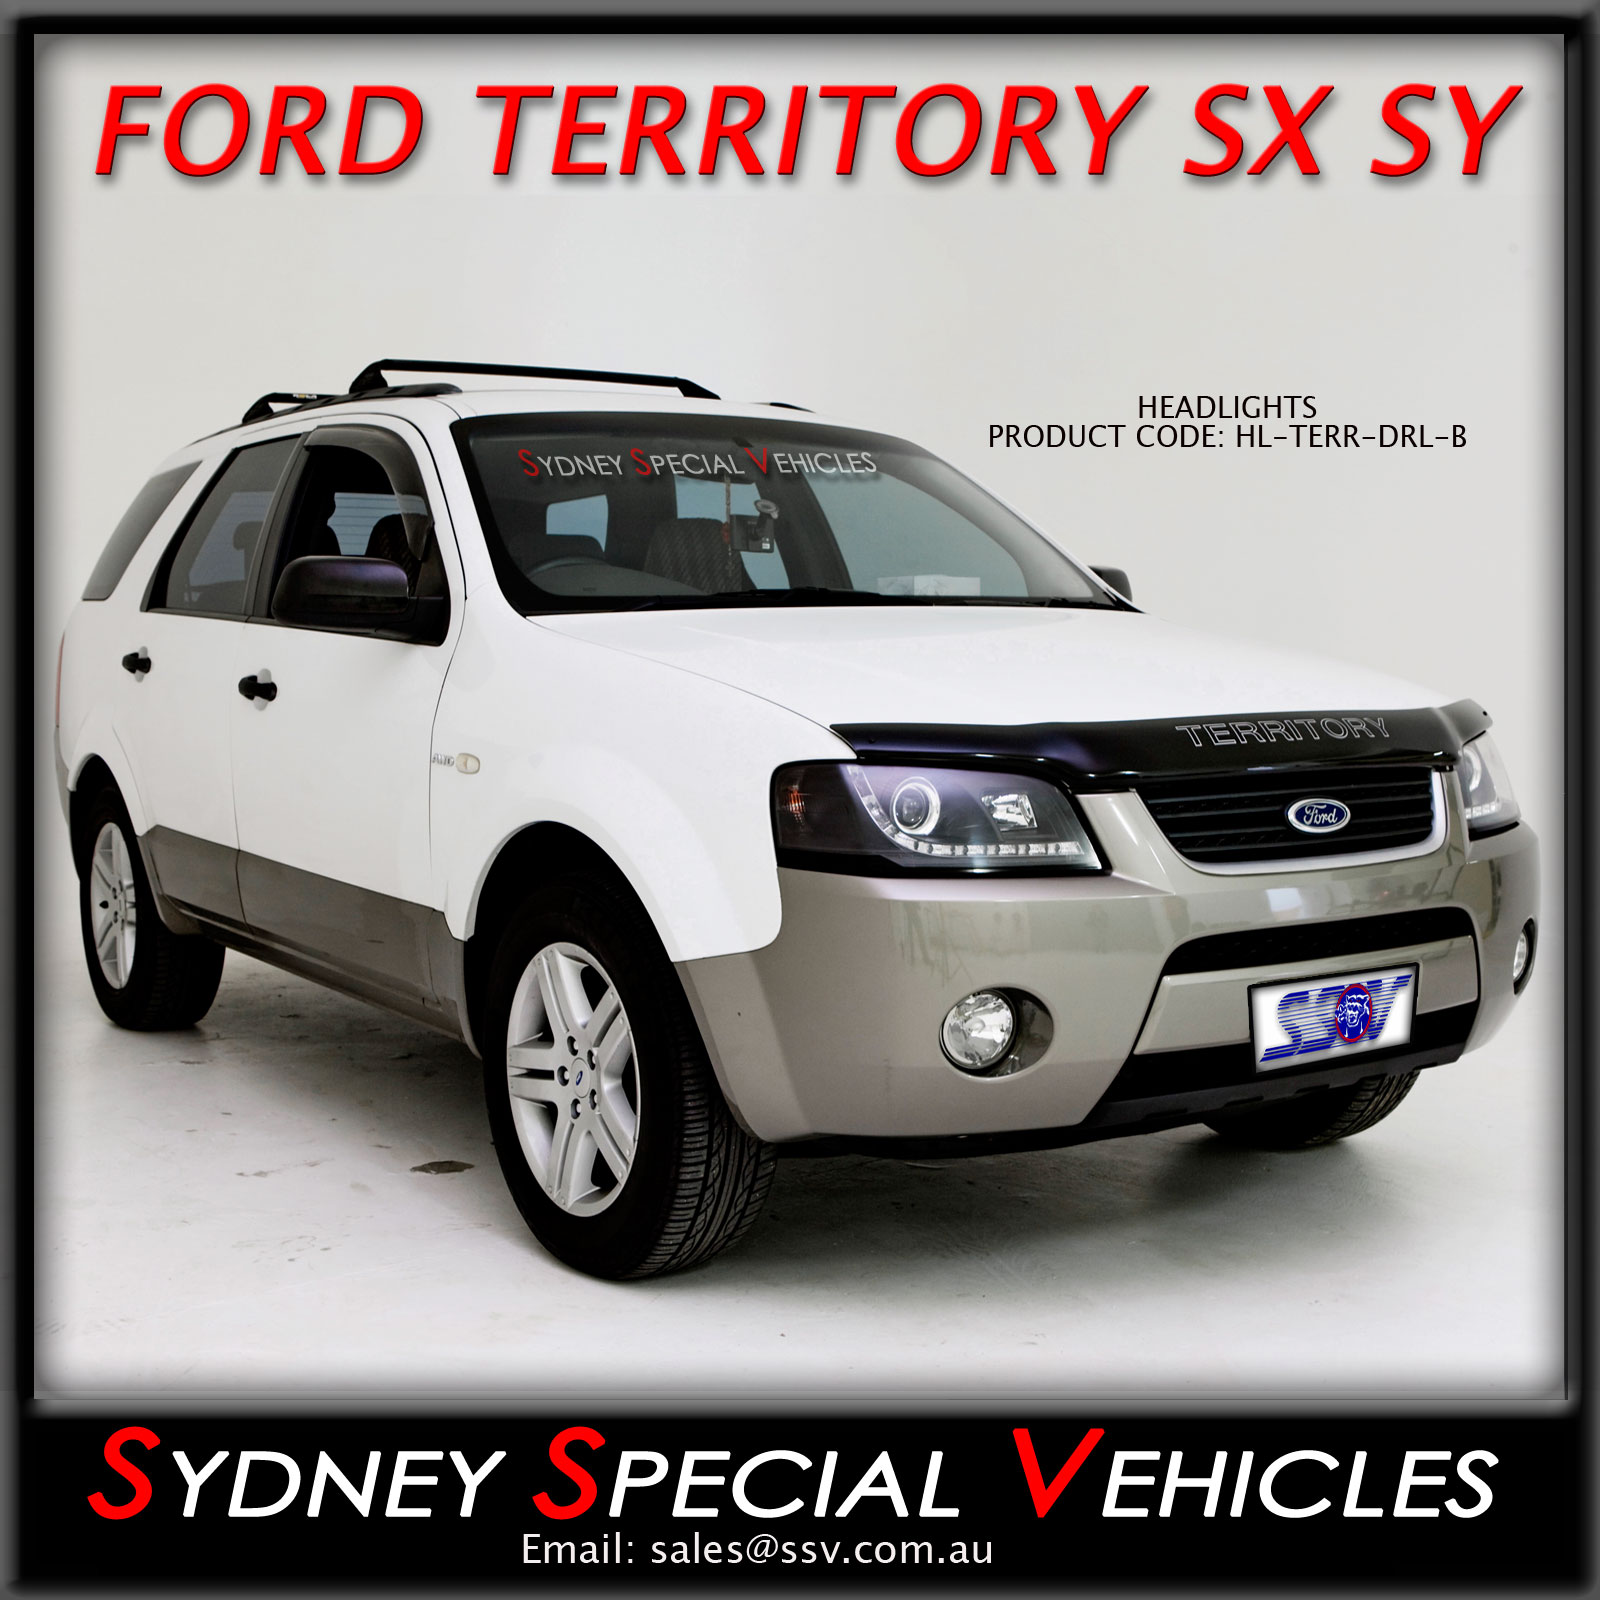 Ford Territory SX SY Super Bright White Xenon Headlight Globes Full Package 